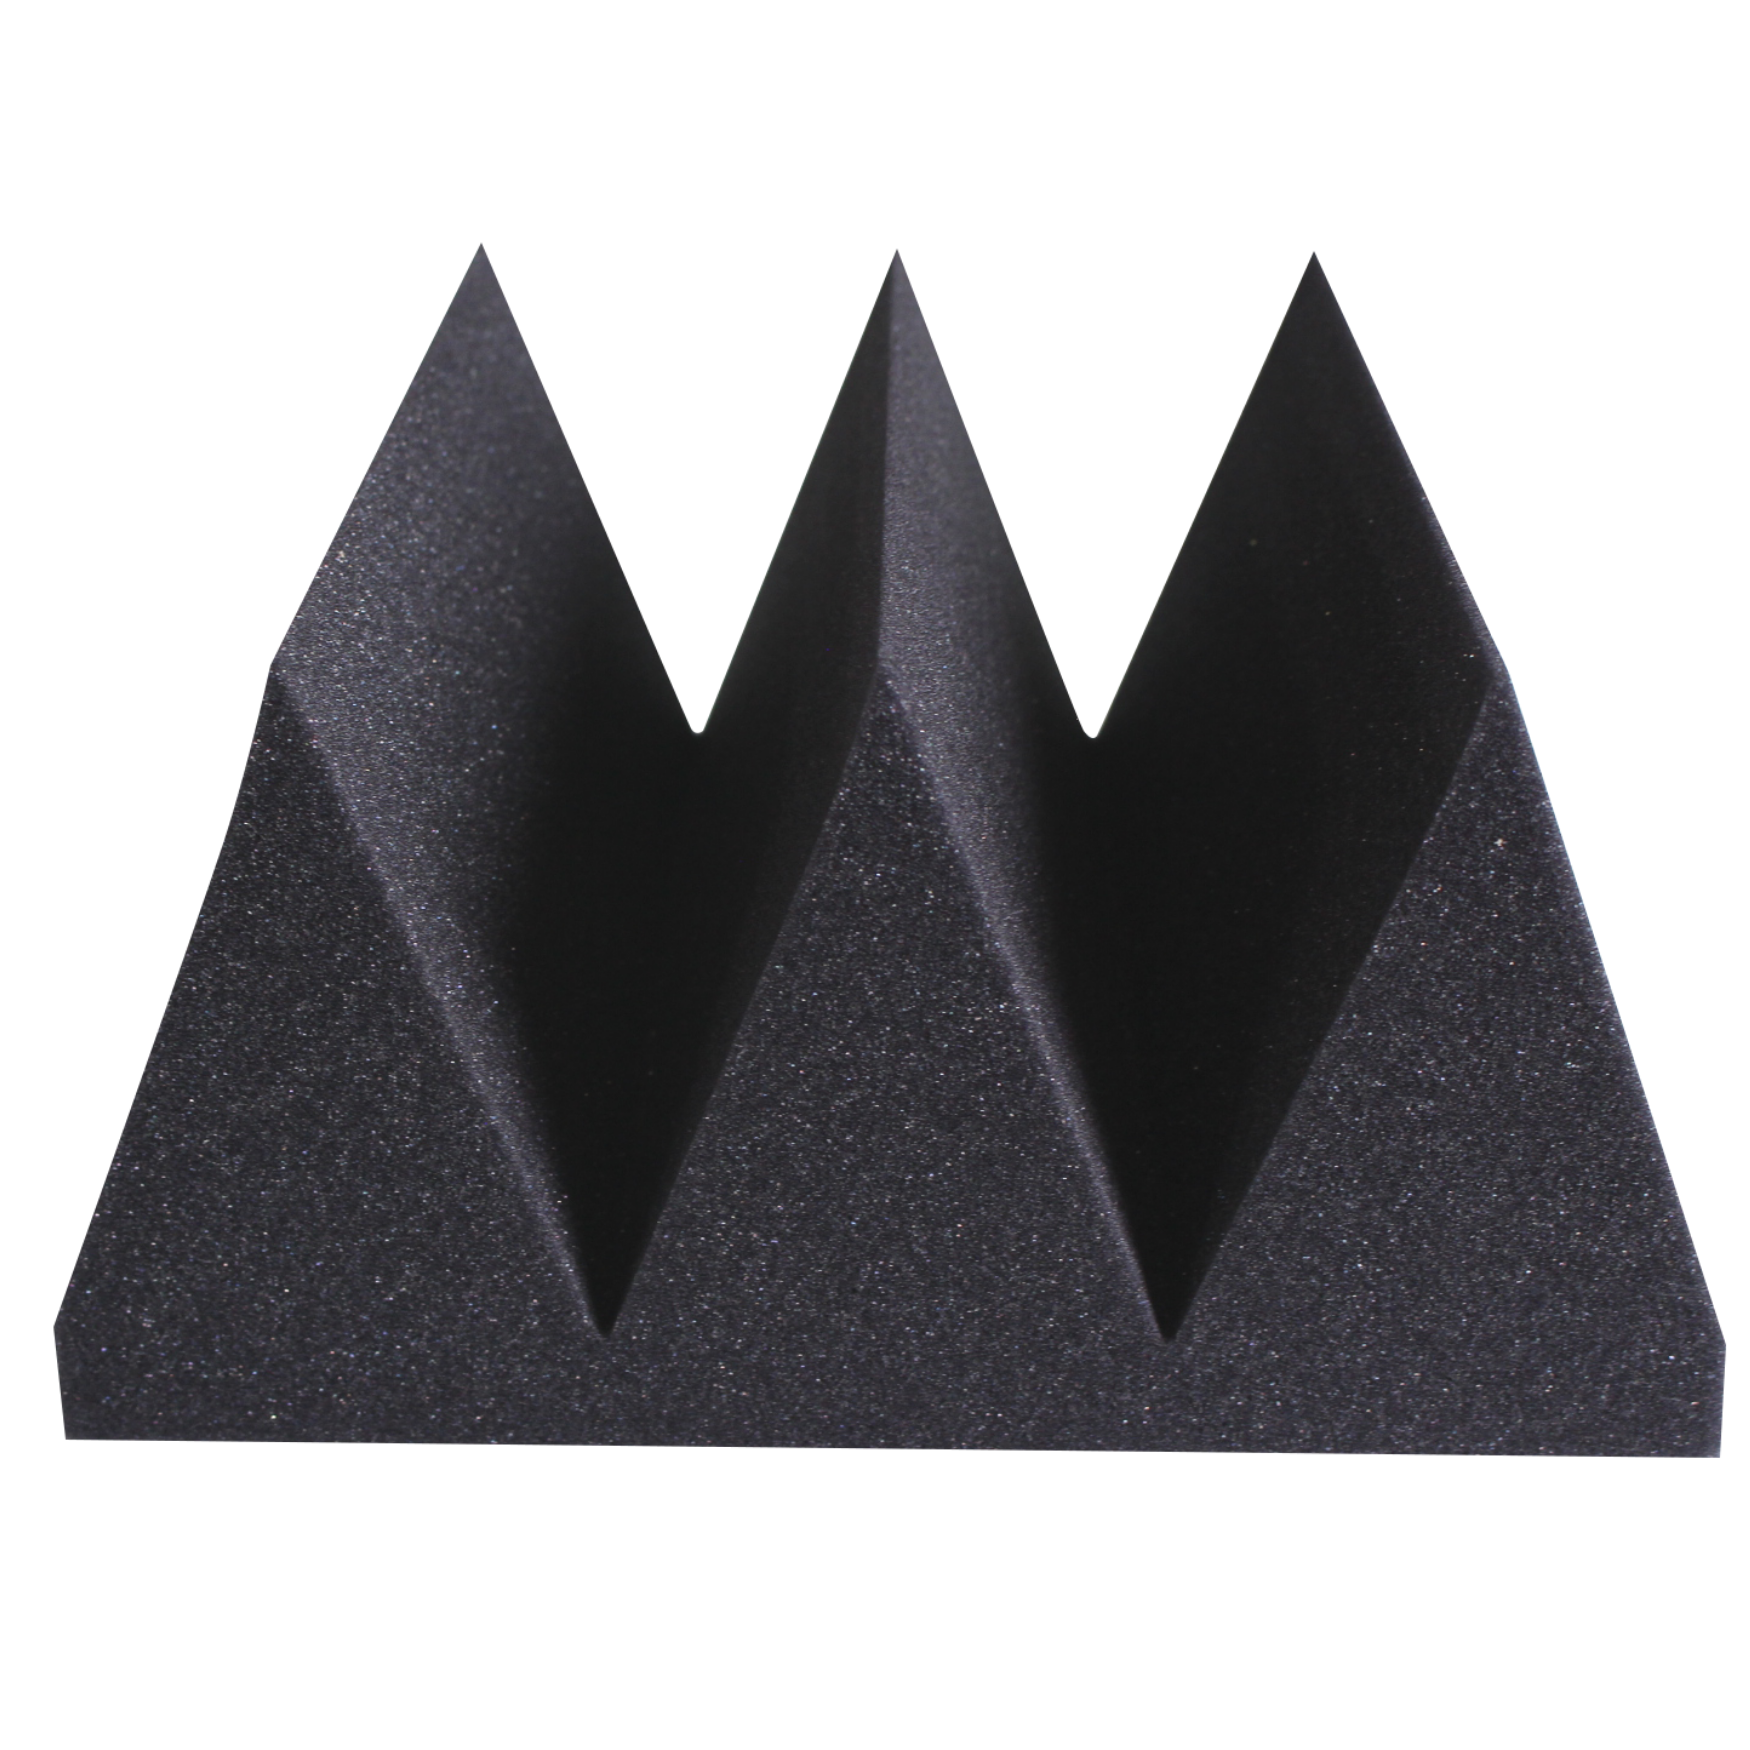 Acoustic Foam Panels, Recording Studio Acoustical Treatments Foam Panels –  2 Inch Thick 12x12 (24 Pack) | Sound Observing Soundproofing Fireproof Wall